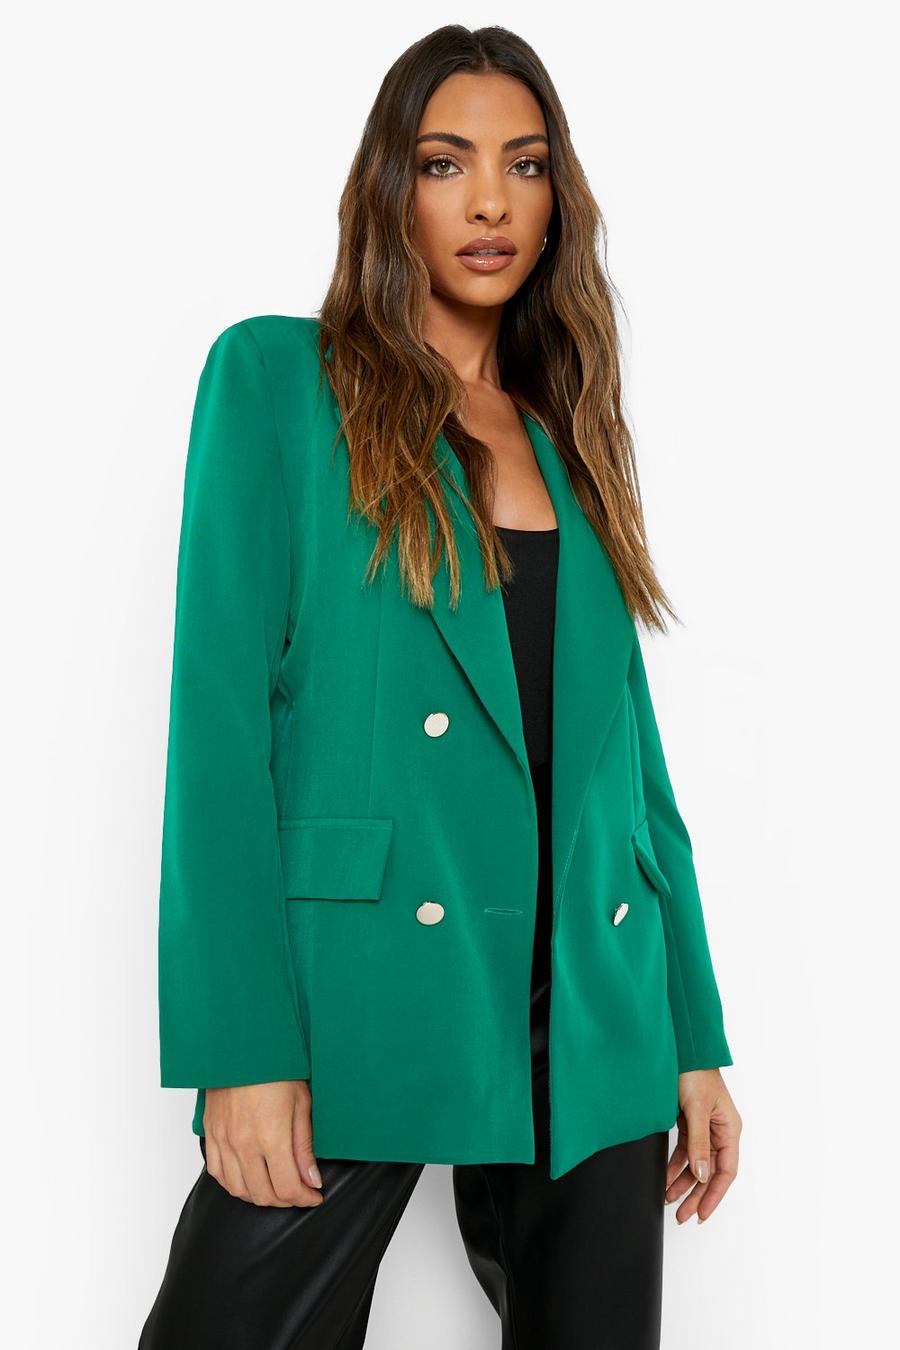 Bright green Double Breasted Tailored Military Blazer